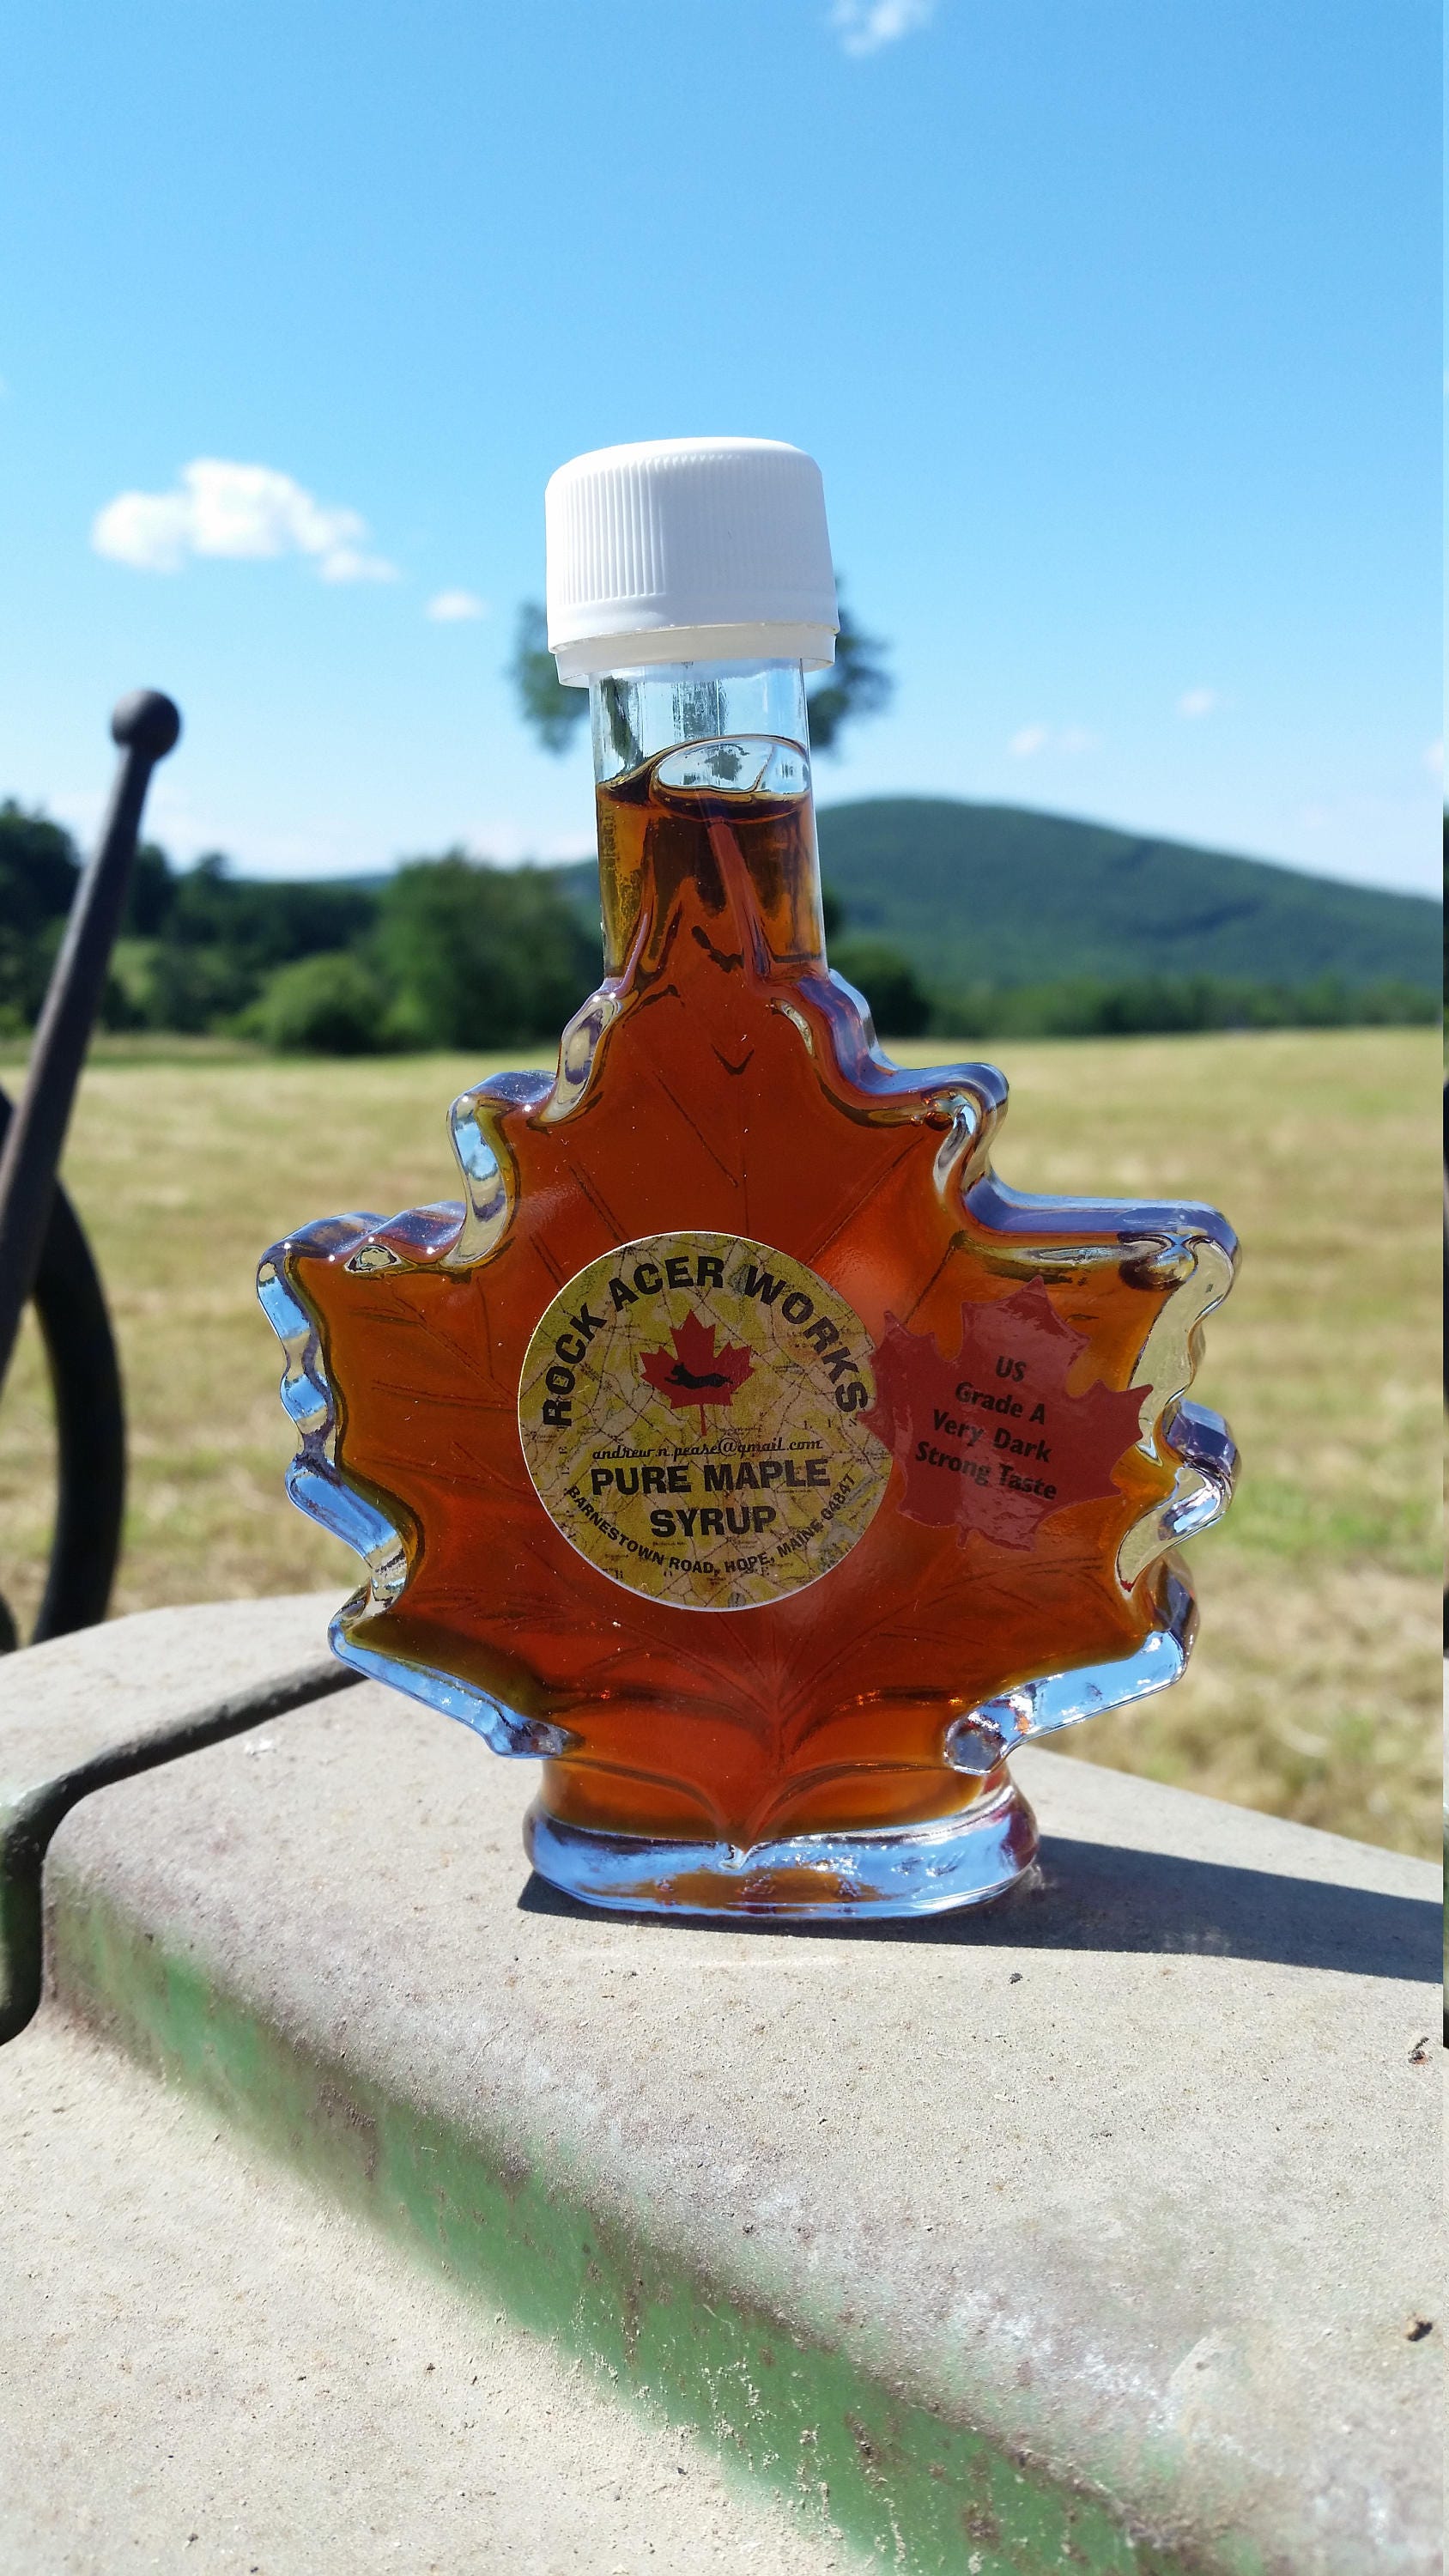 Pure Maine Maple Syrup